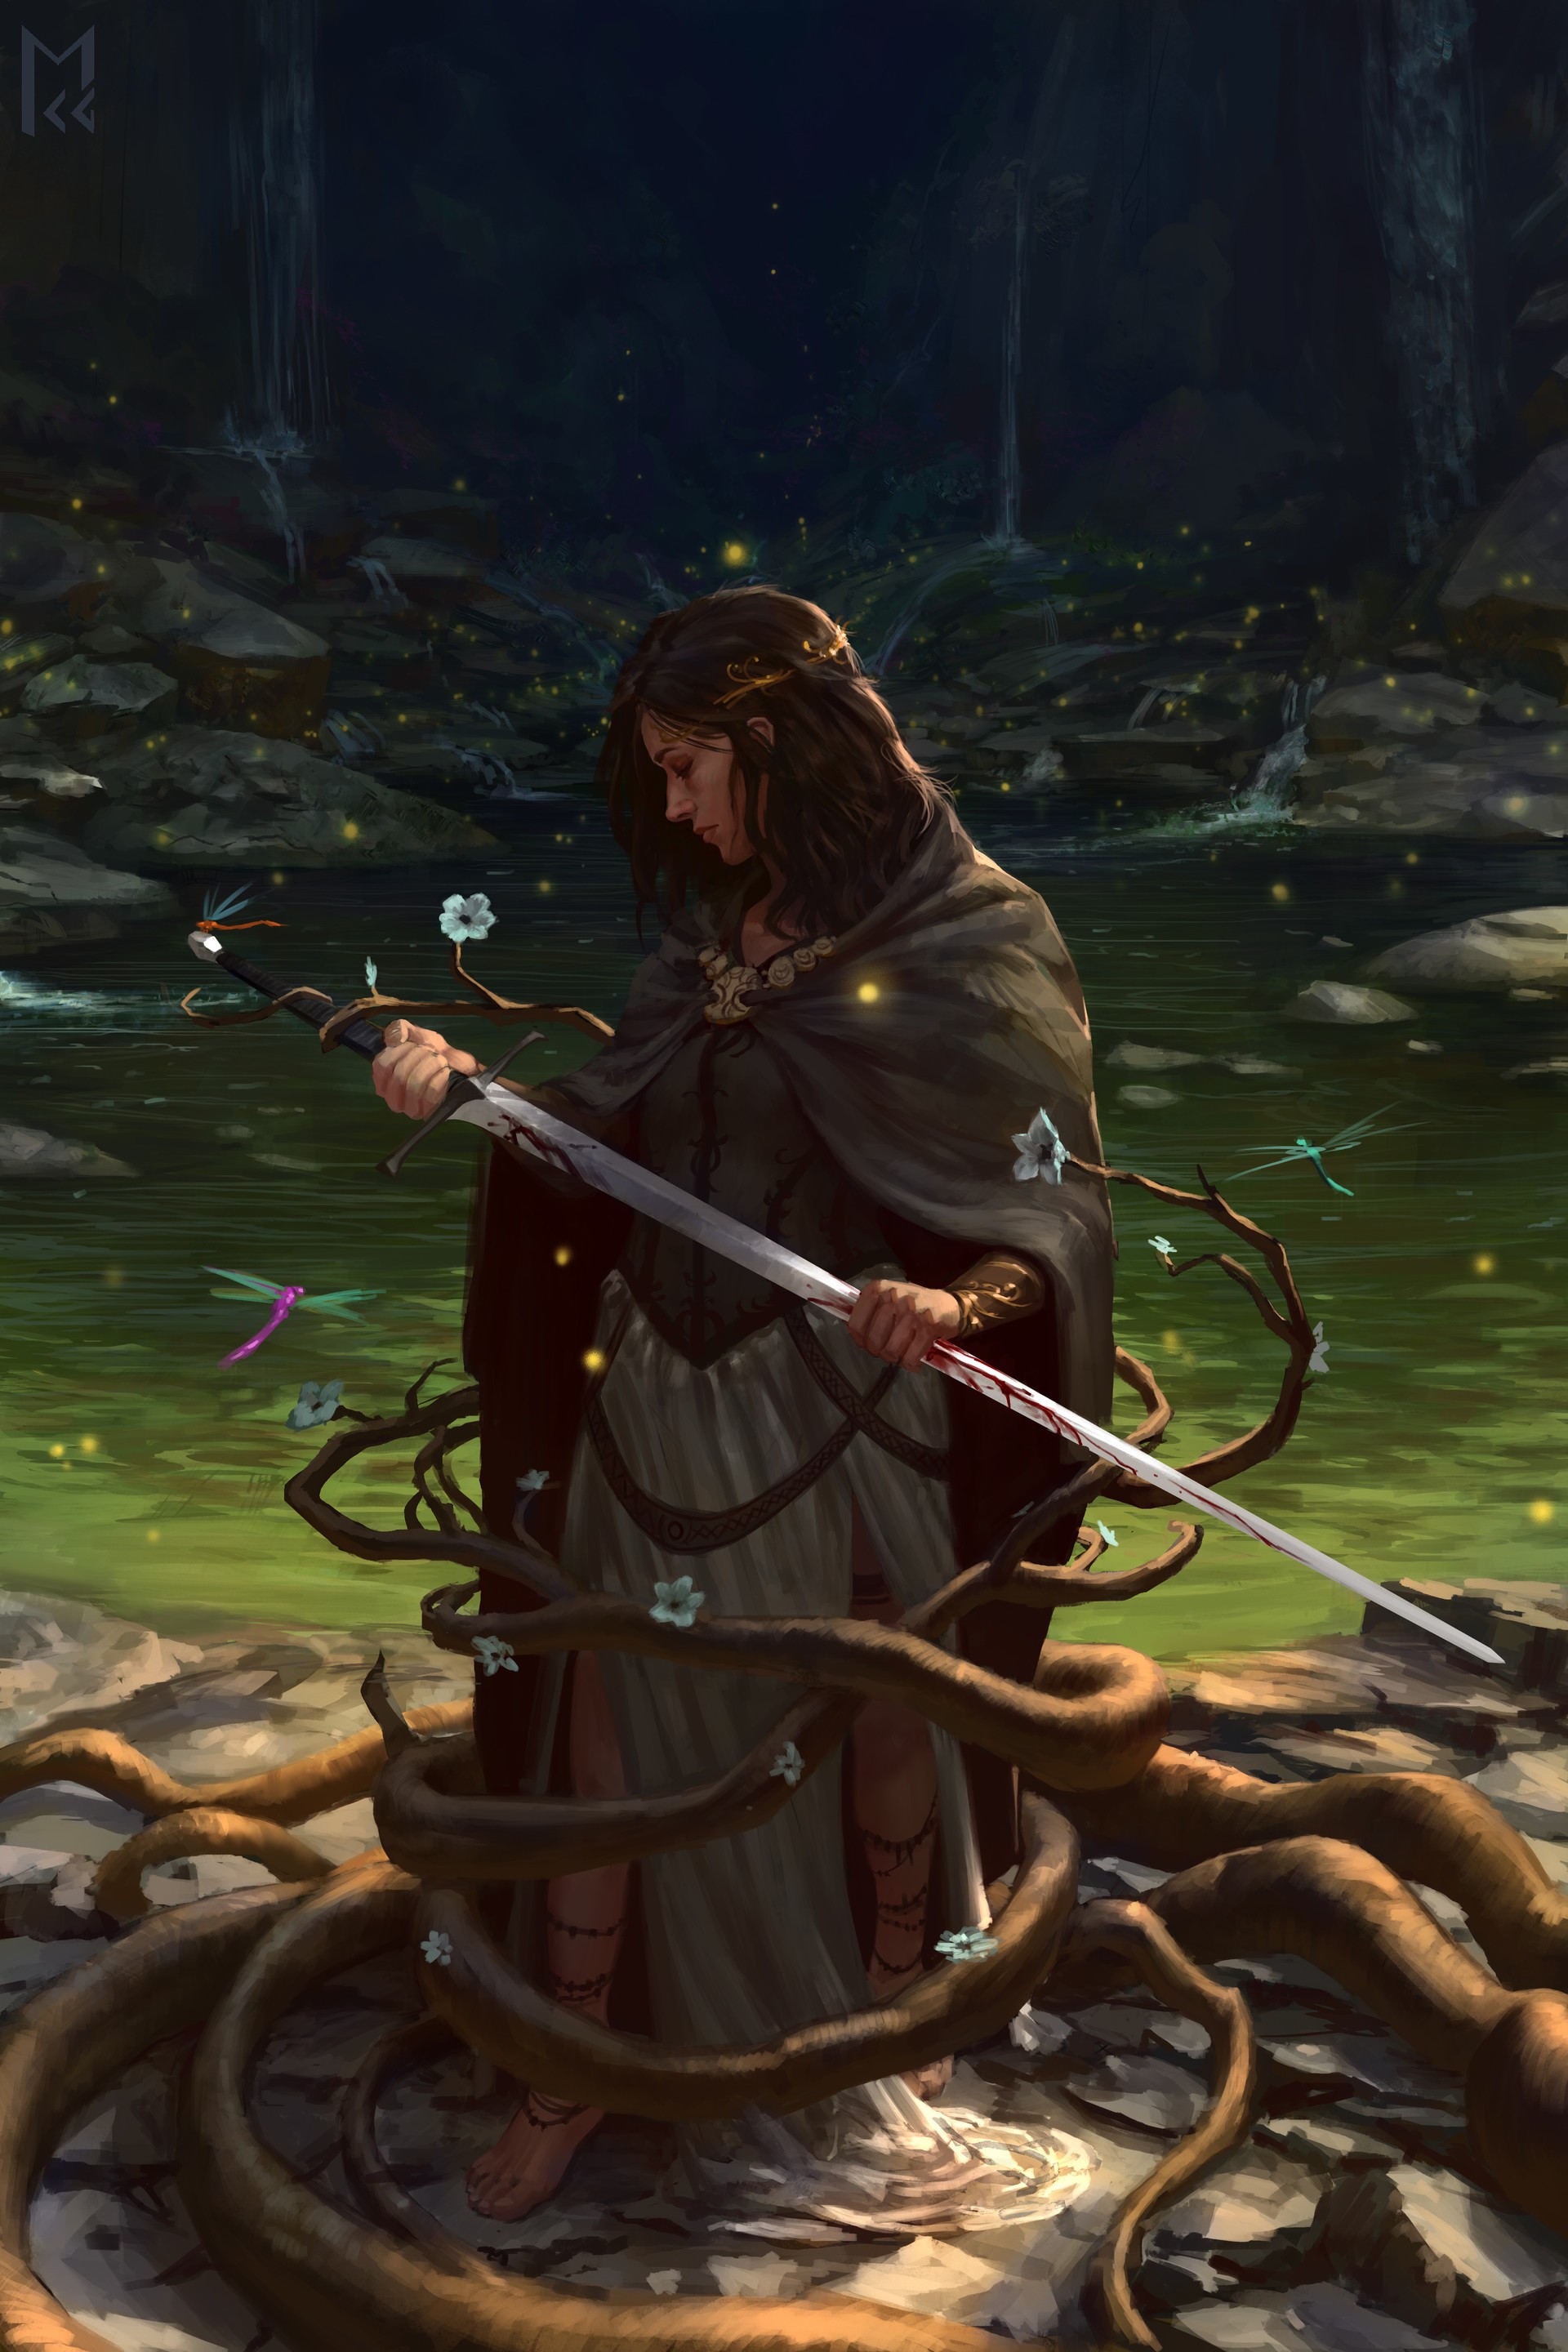 General 1920x2880 fantasy art warrior sword fantasy girl digital art portrait display watermarked standing women with swords water outdoors women outdoors weapon rocks cape ground flowers long hair closed mouth vines fireflies barefoot